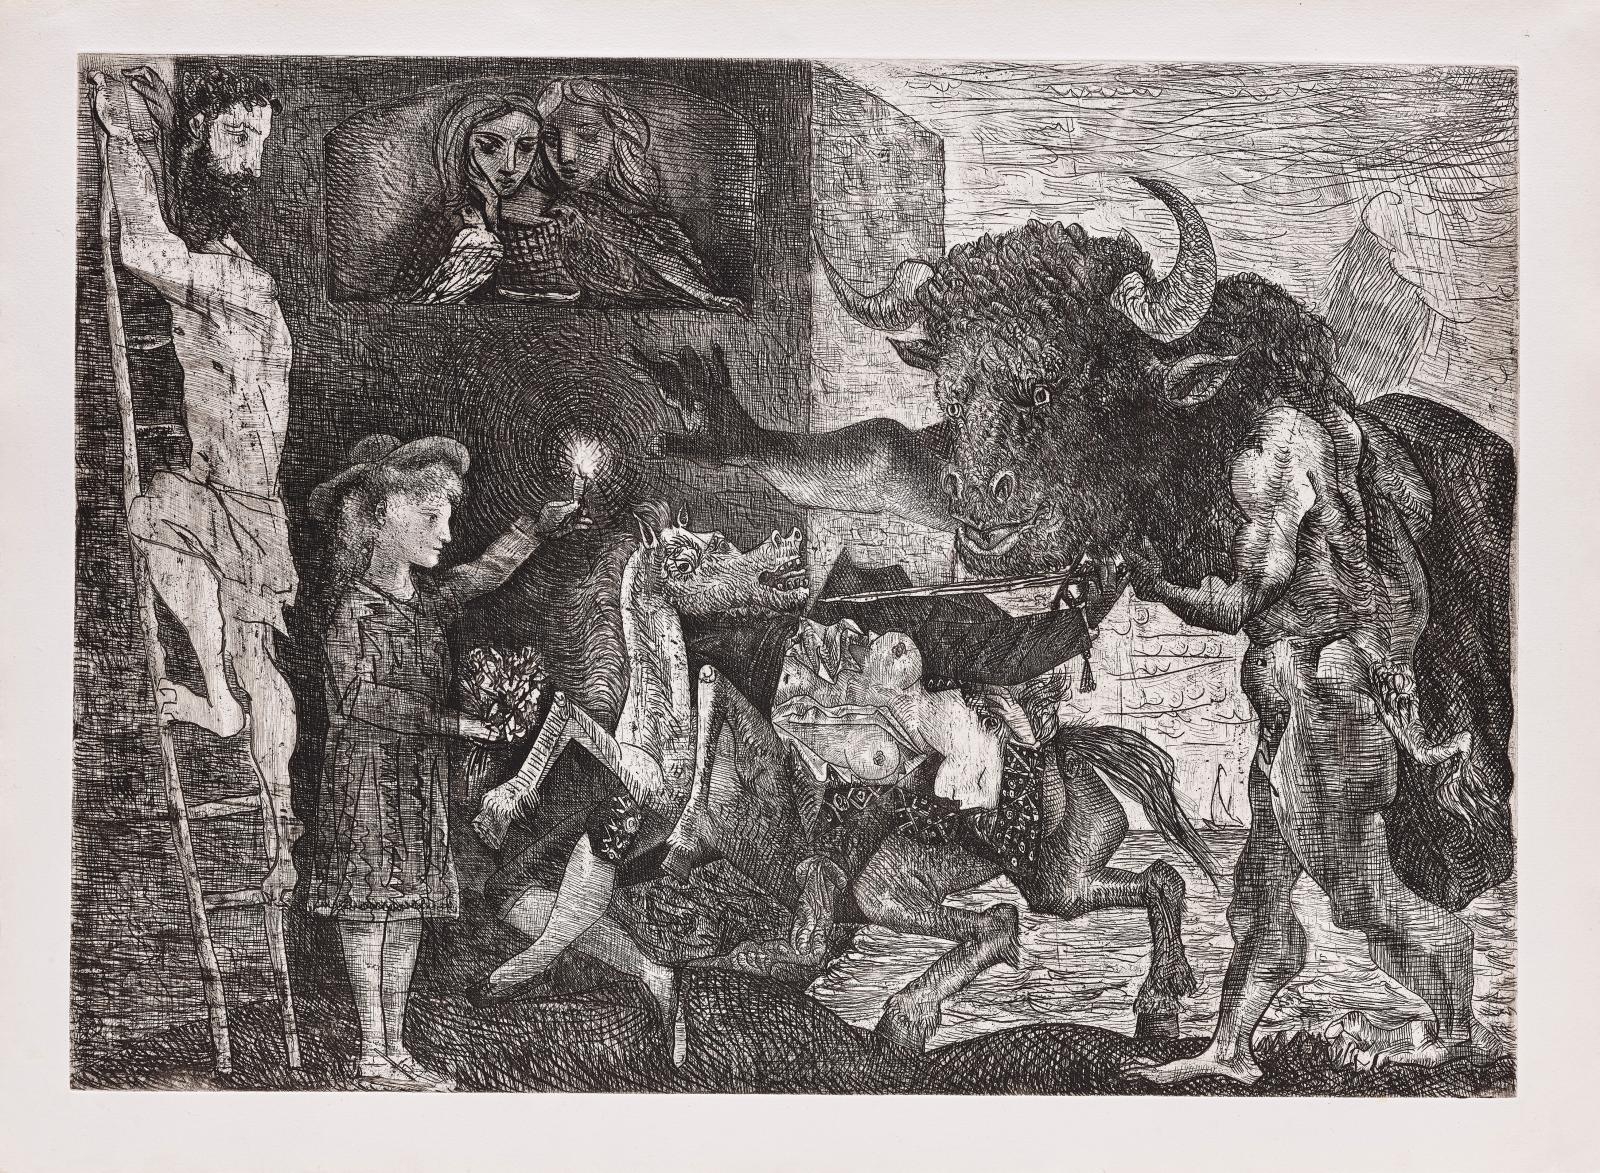 Picasso and the Minotaur